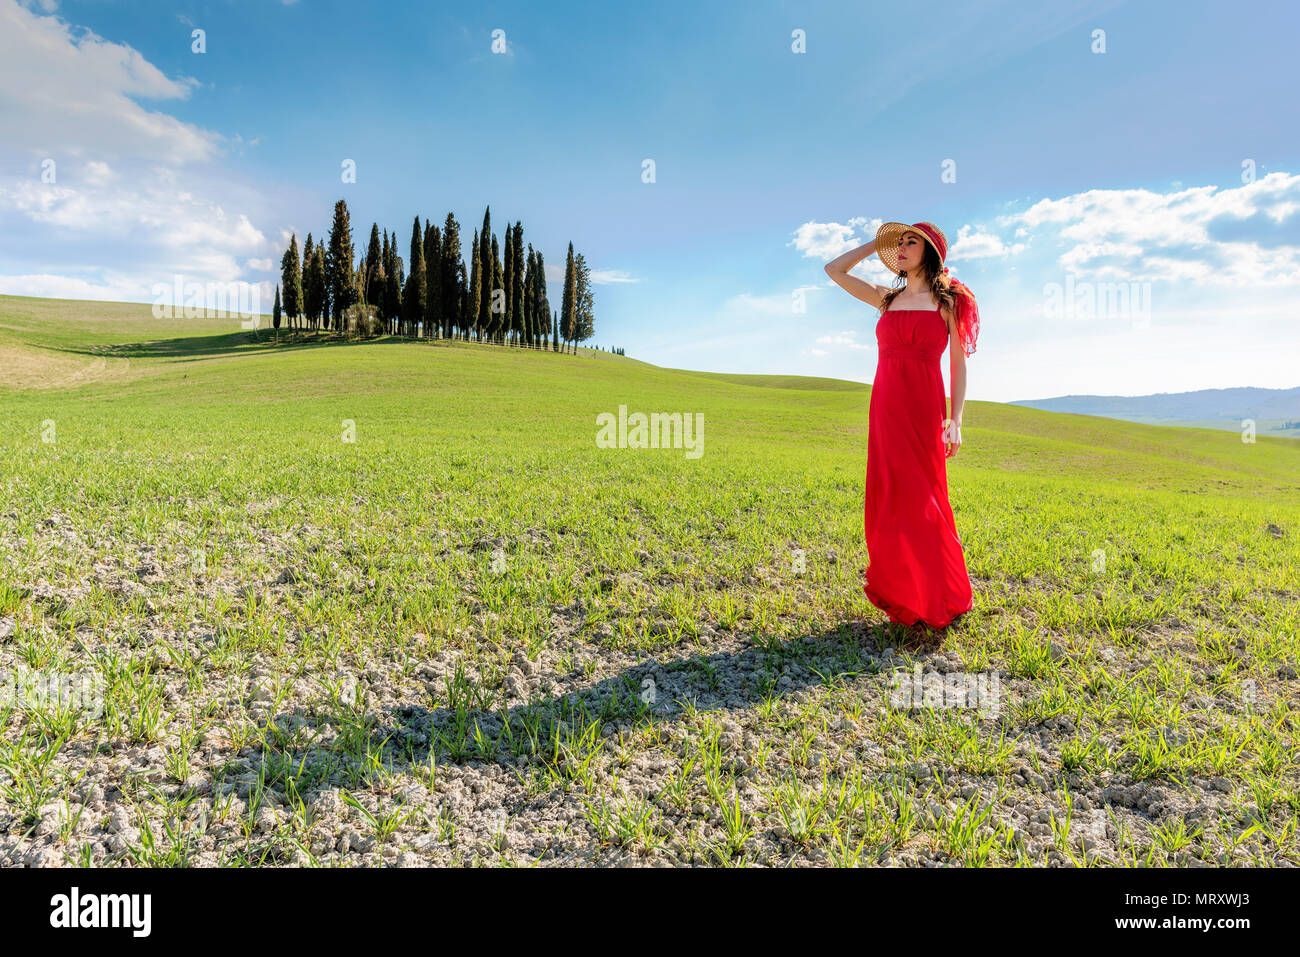 San Quirico d'Orcia, Orcia valley, Siena, Tuscany, Italy. A young woman in red dress admiring the view in a wheat field near the cypresses of Orcia va Stock Photo